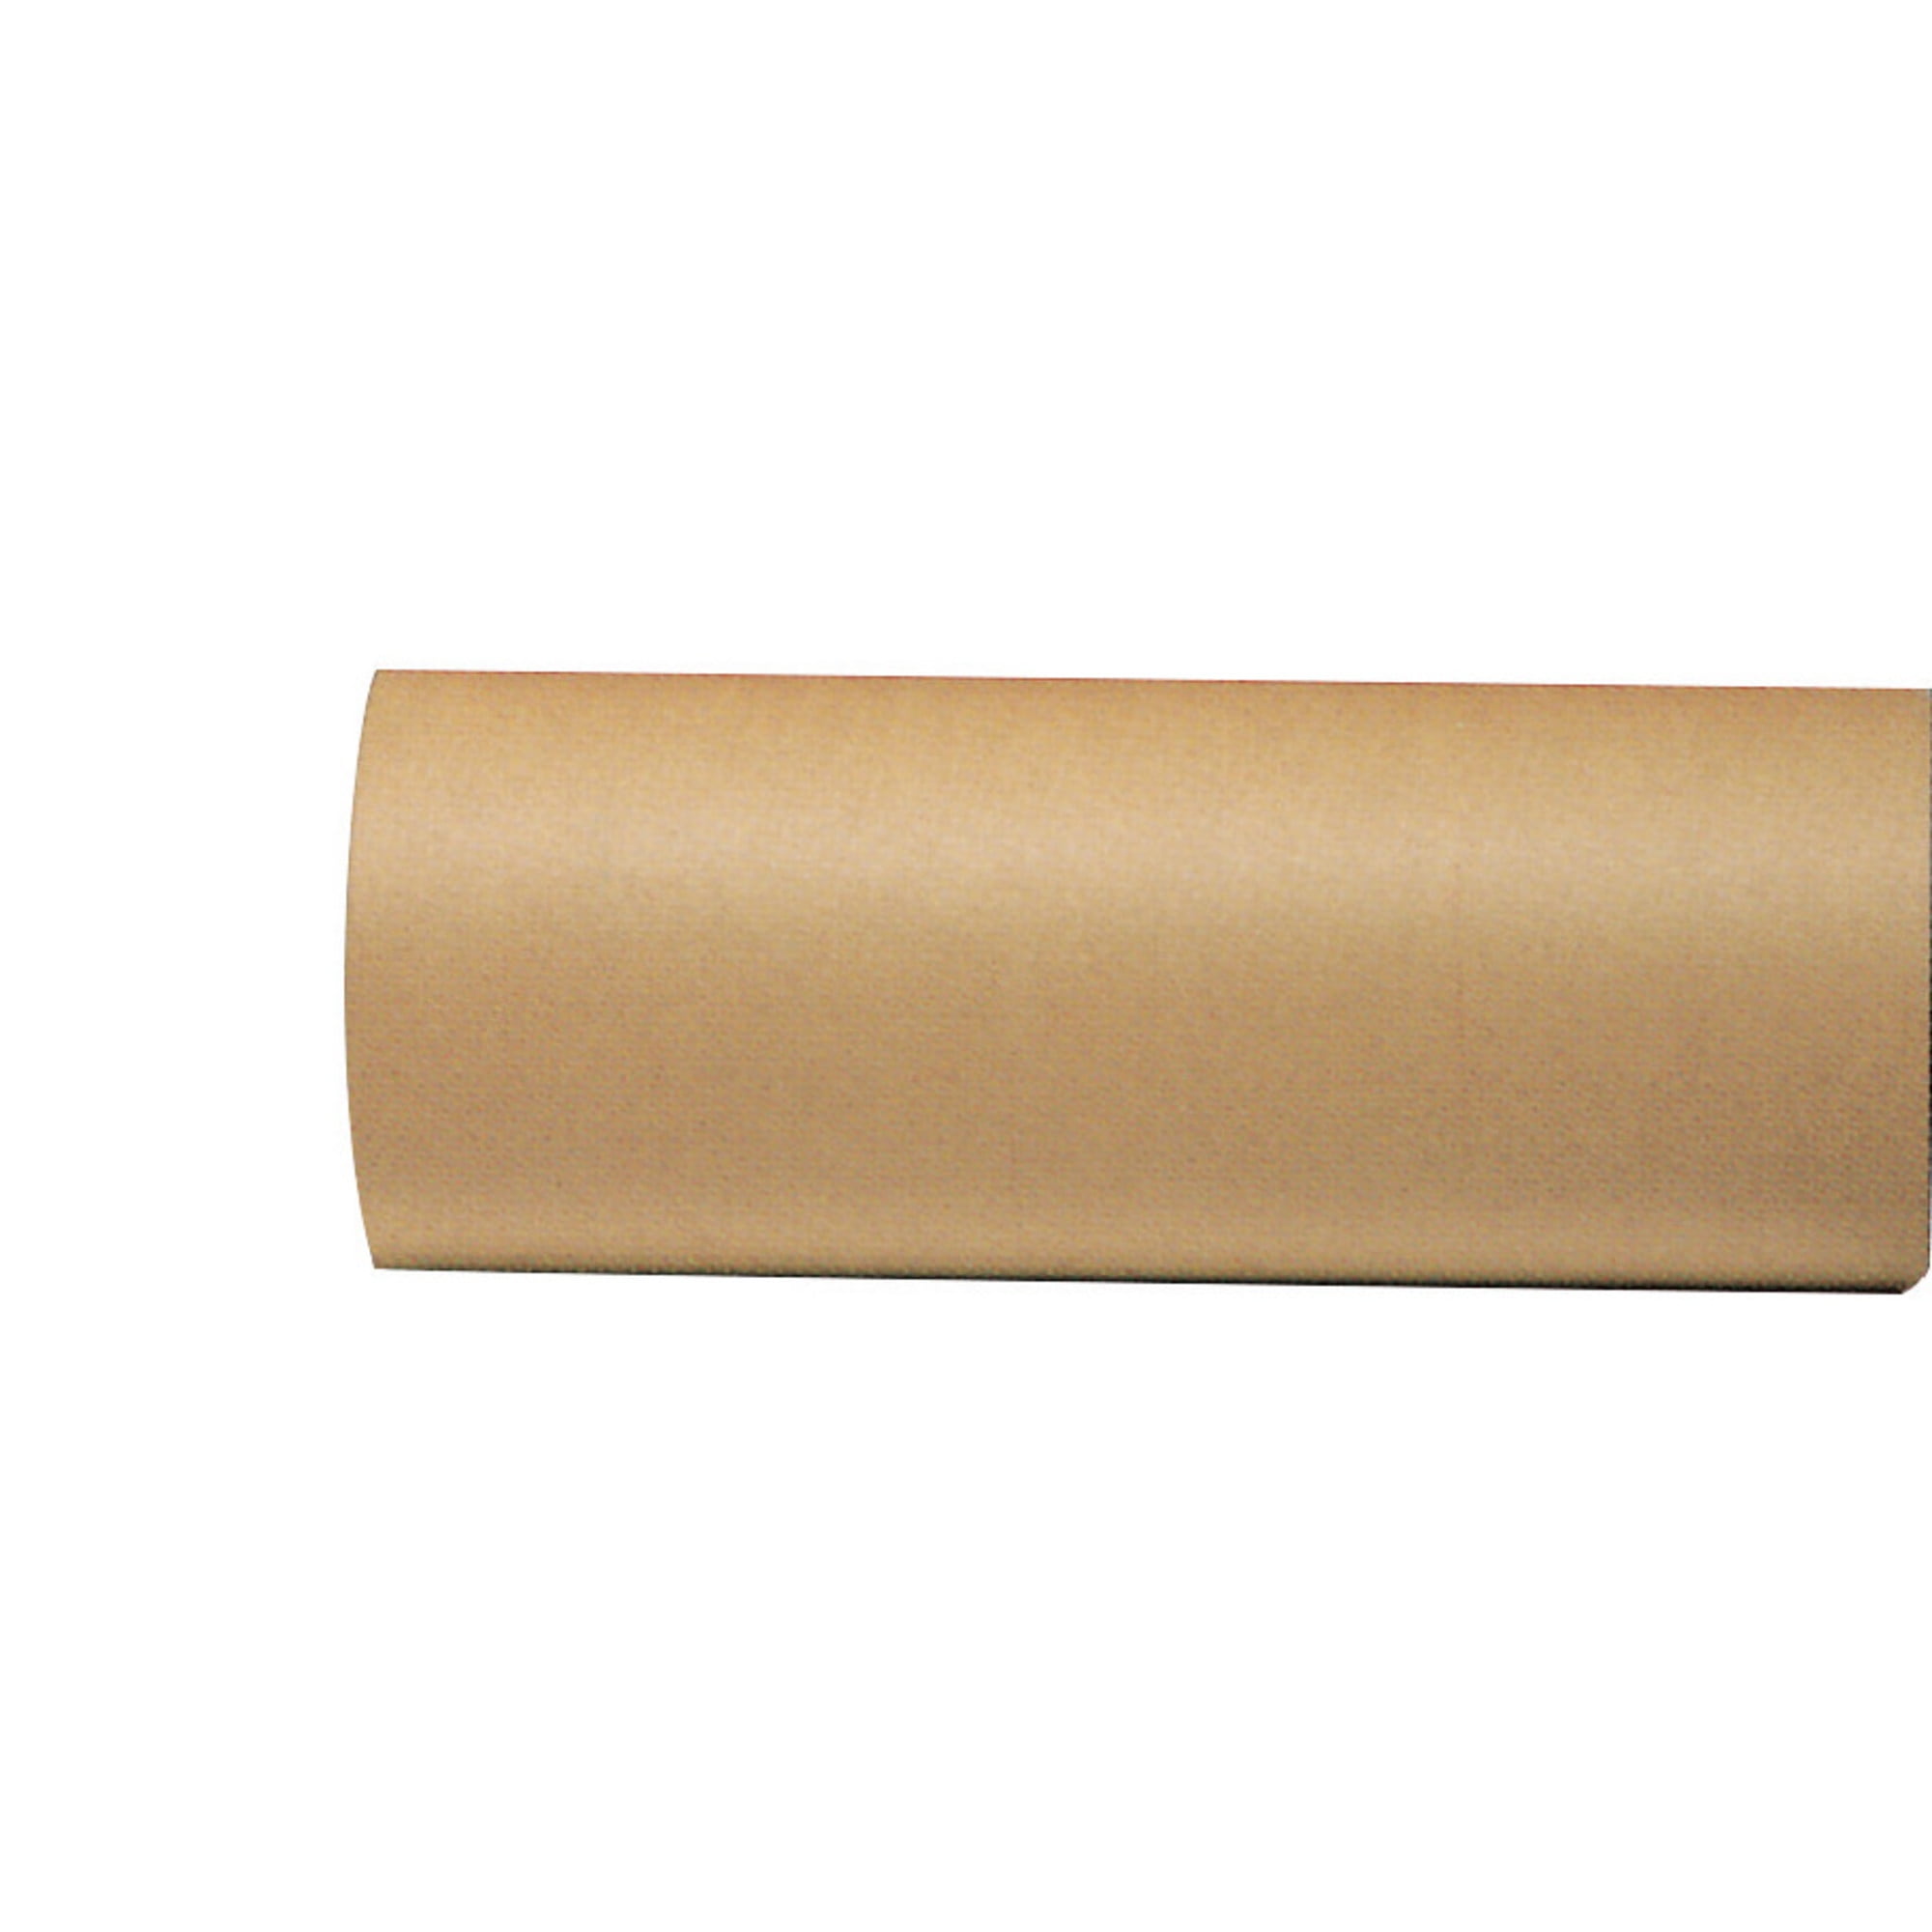 Pacon Kraft Paper Roll, 40 lb,36 Inches x 100 Feet, Natural